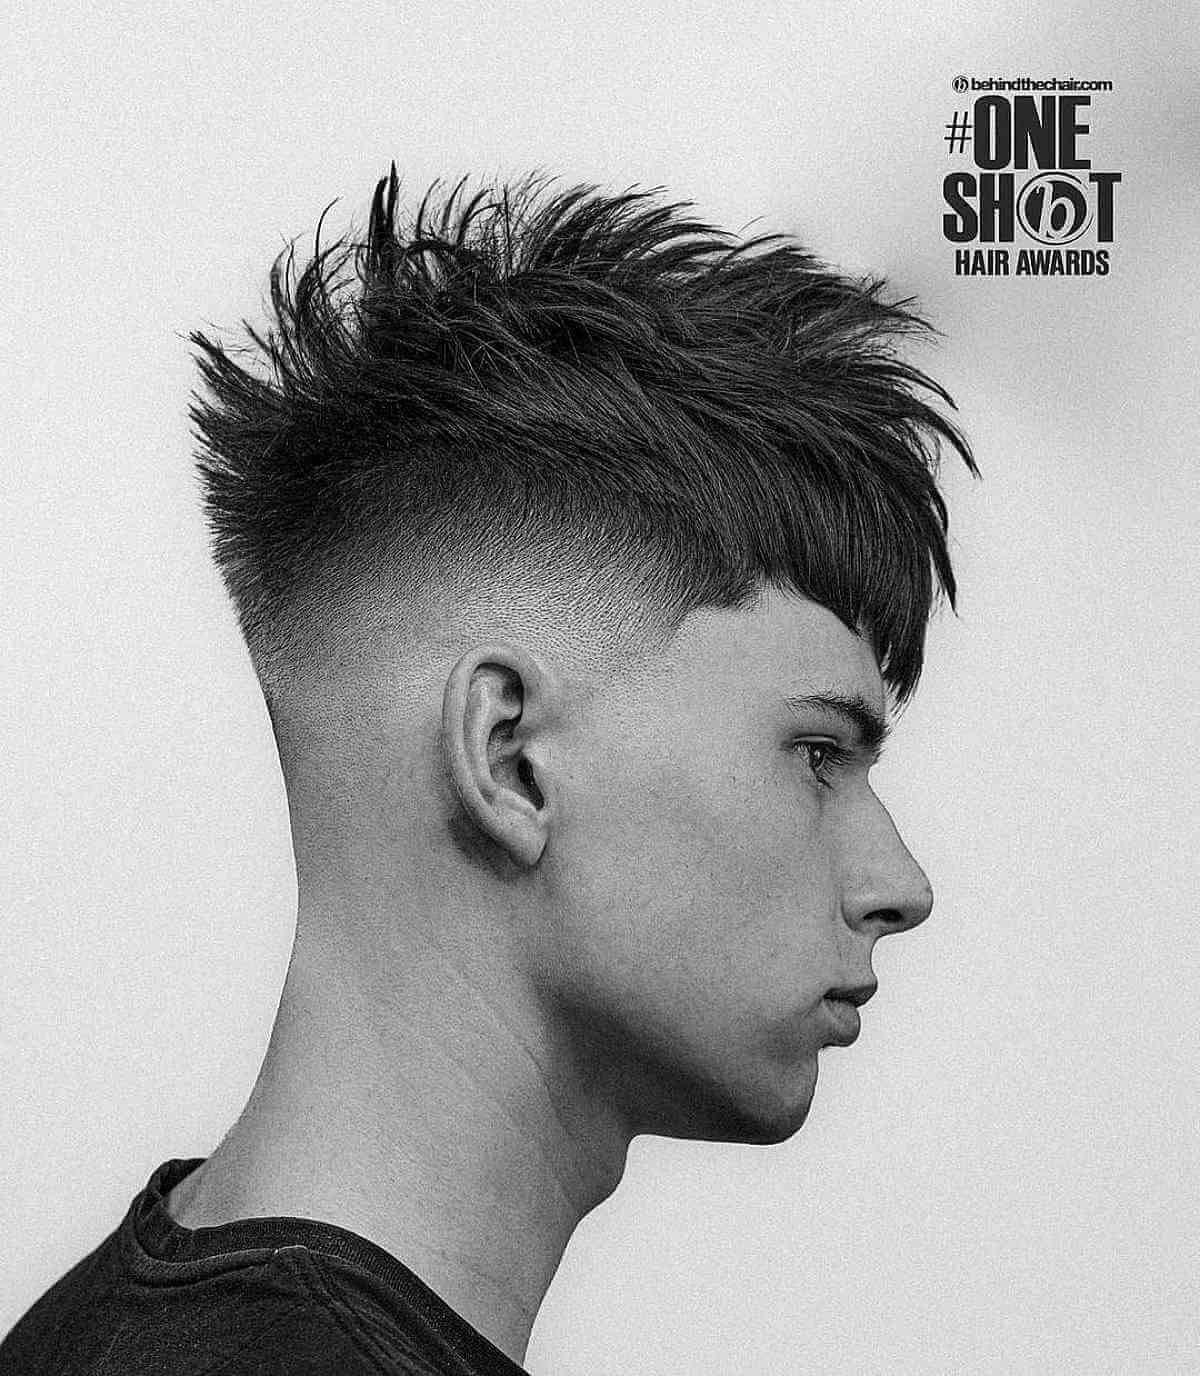 Men's Hairstyle | Boys Haircut - Apps on Google Play